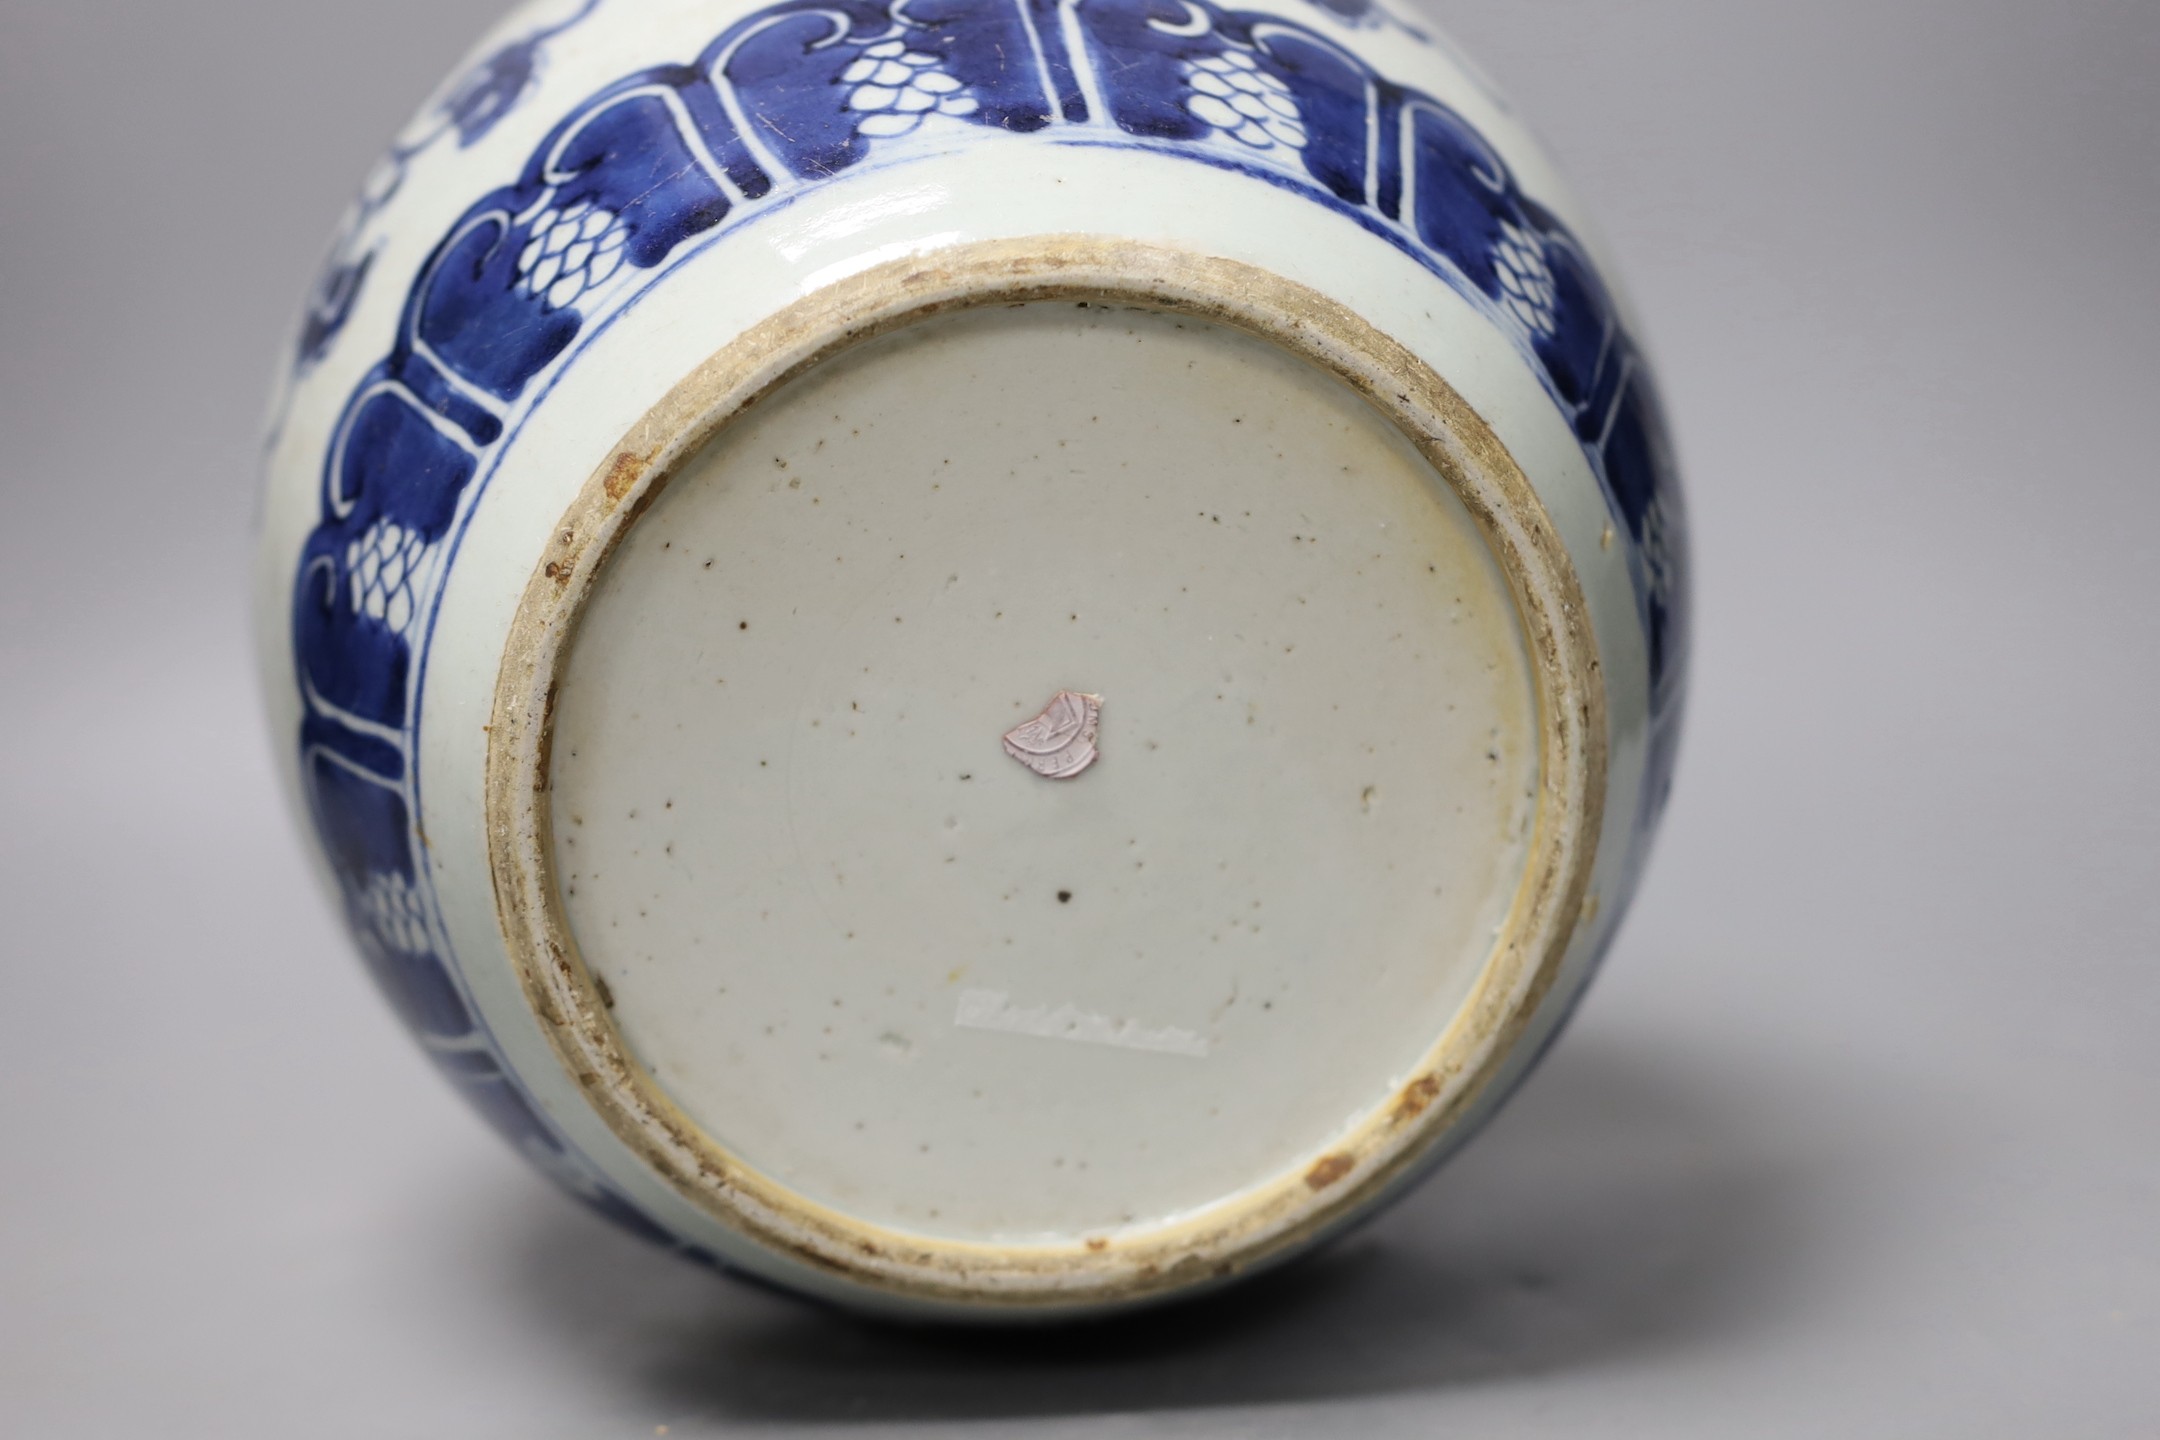 An 18th century Chinese blue and white jar, painted with ‘shou’, flowers and tendrils, 22cm high